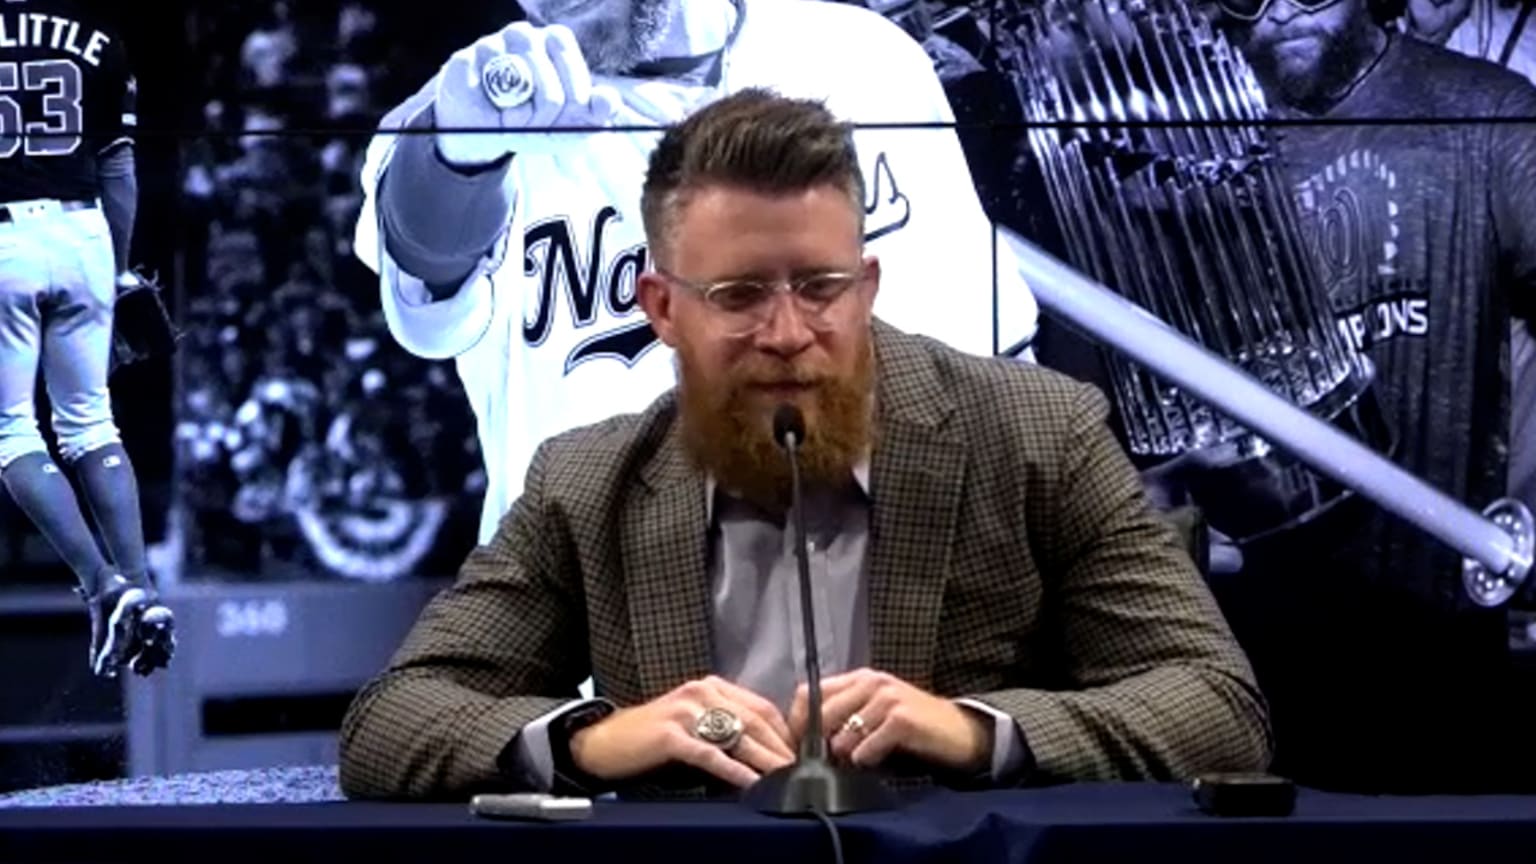 Interview with Sean Doolittle of the Washington Nationals